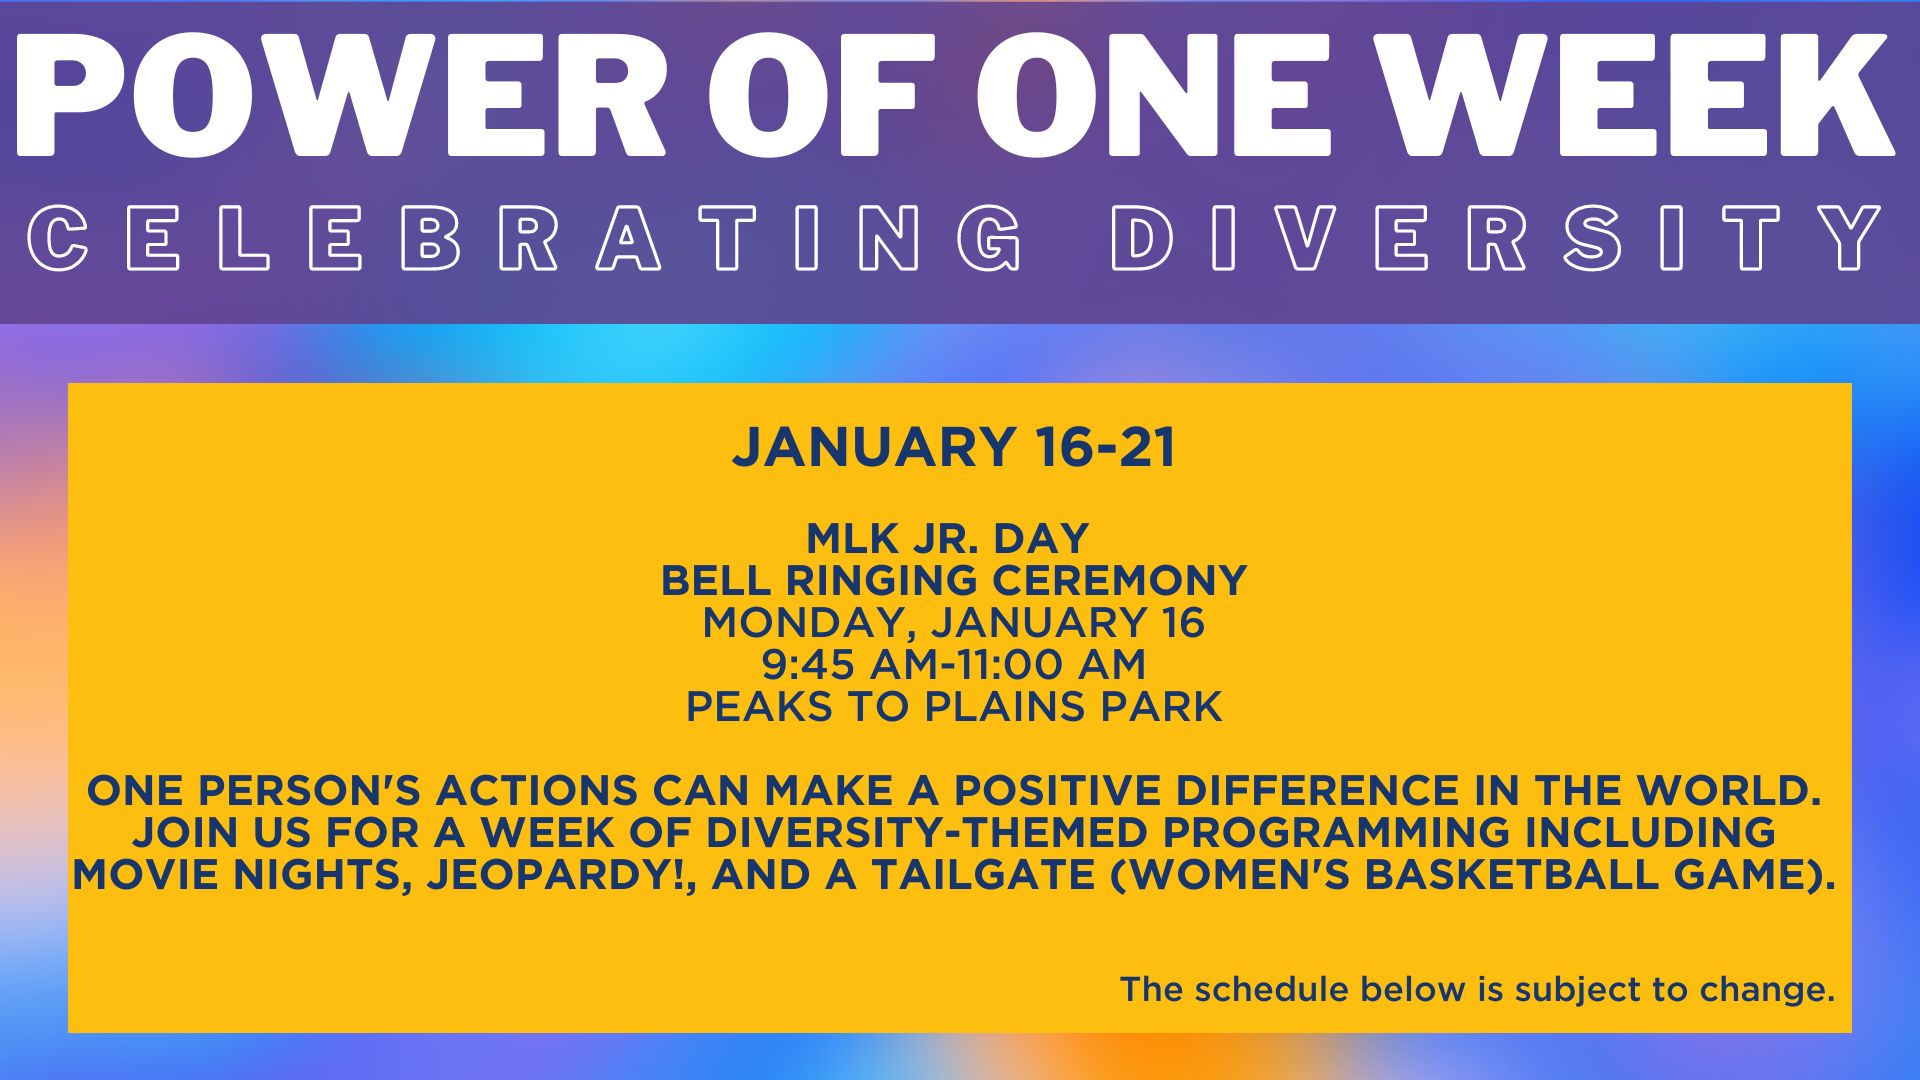  January 16-21  mlk jr. day  Bell ringing ceremony Monday, January 16 9:45 AM-11:00 AM Peaks to Plains Park  One person's actions can make a positive difference in the world. Join us for a week of diversity-themed programming including movie nights, jeopardy!, and a tailgate (women's basketball game). The schedule below is subject to change.